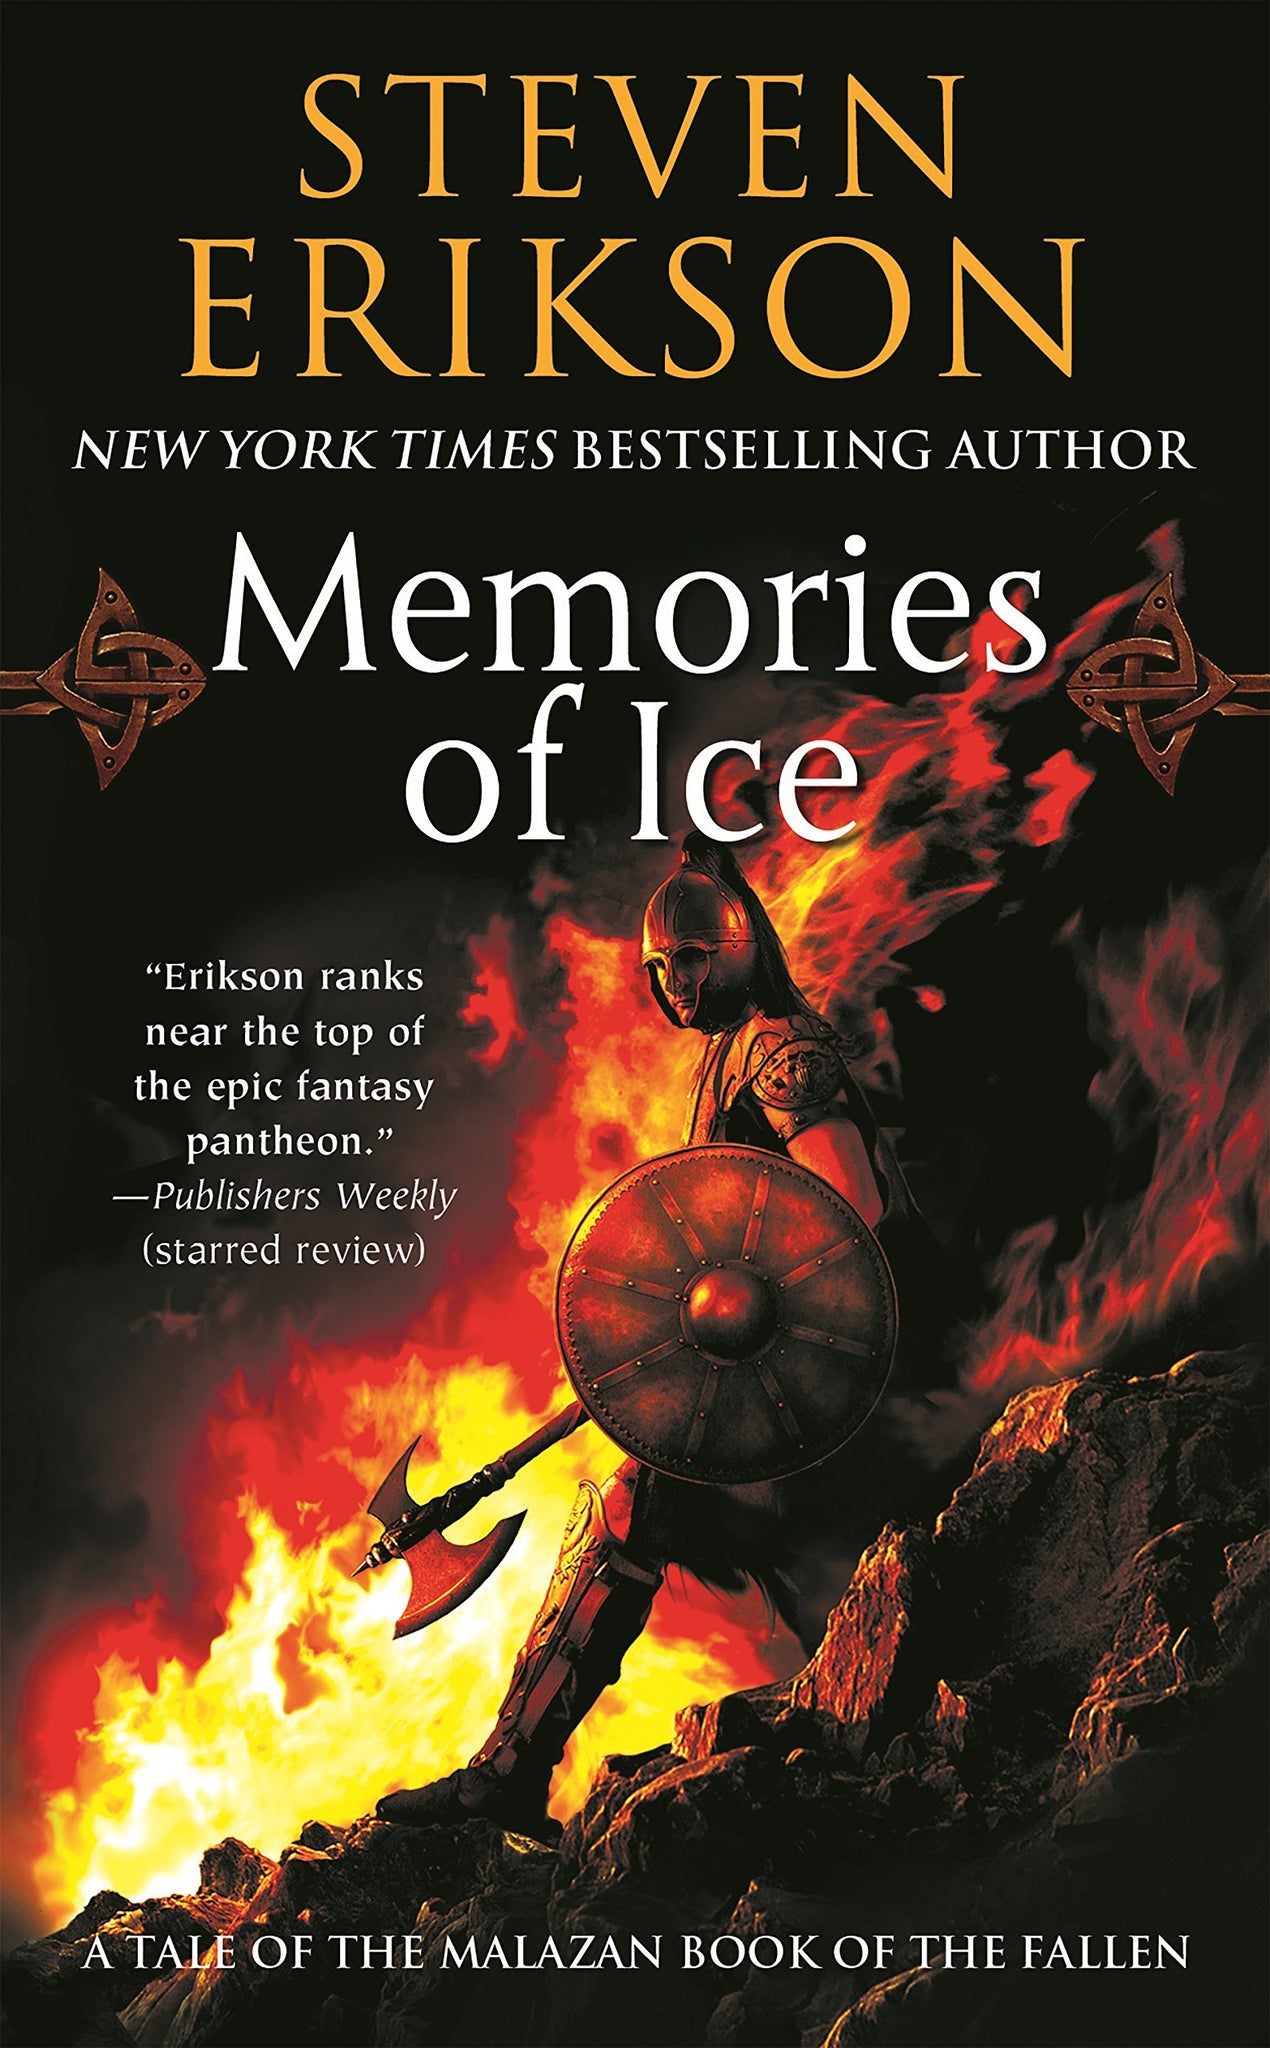 Malazan Book of the Fallen #3 : Memories of Ice by Steven Erikson